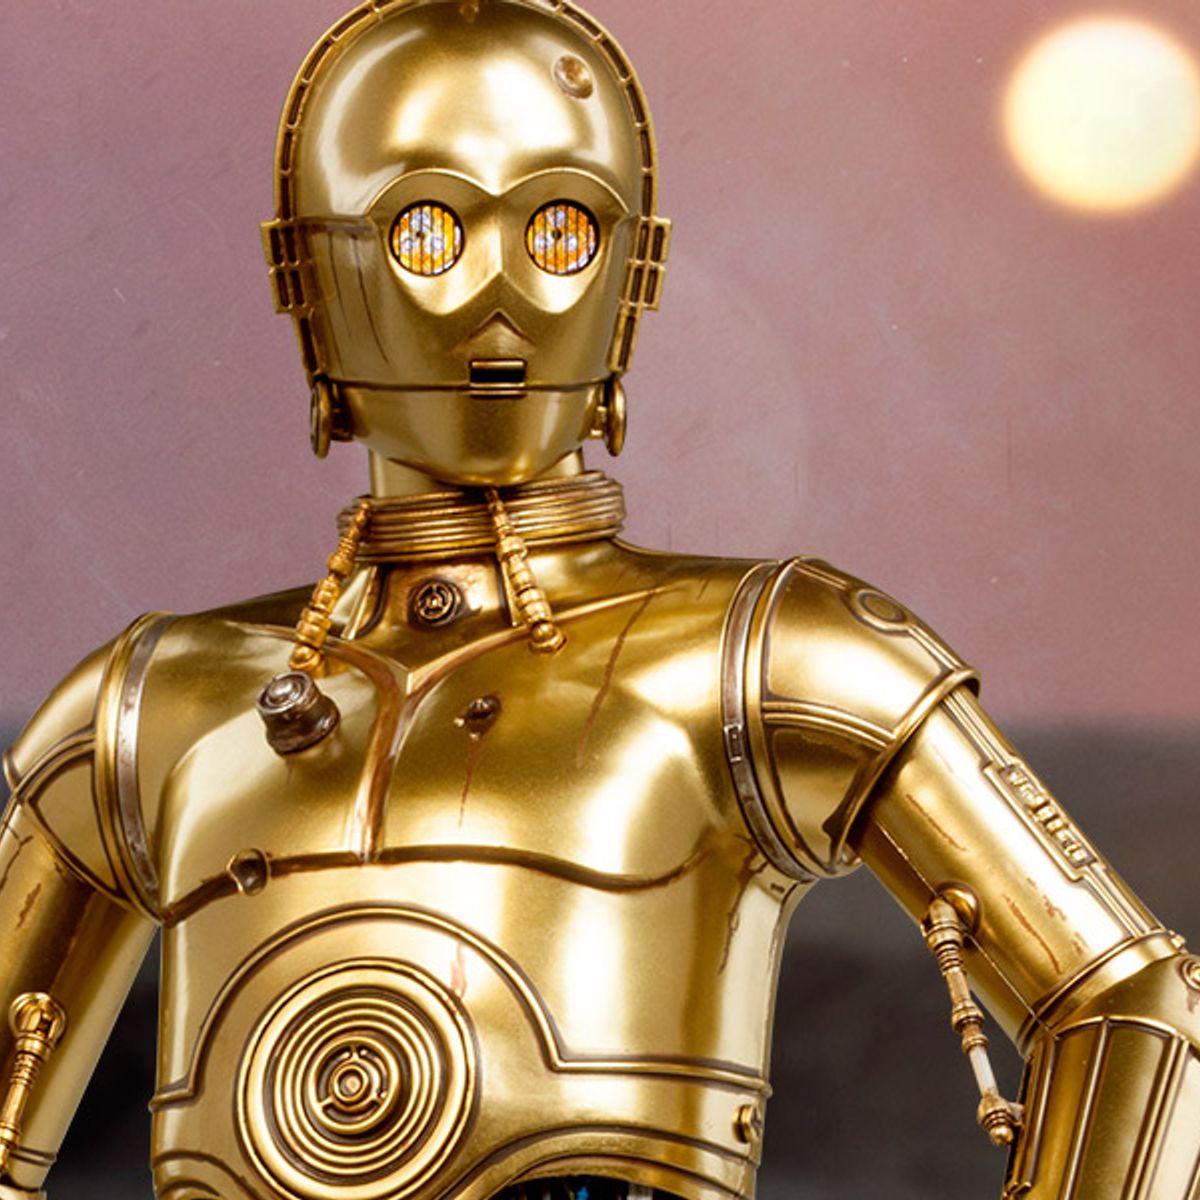 Is This 'Star Wars' C-3P0 Trading Card | Snopes.com